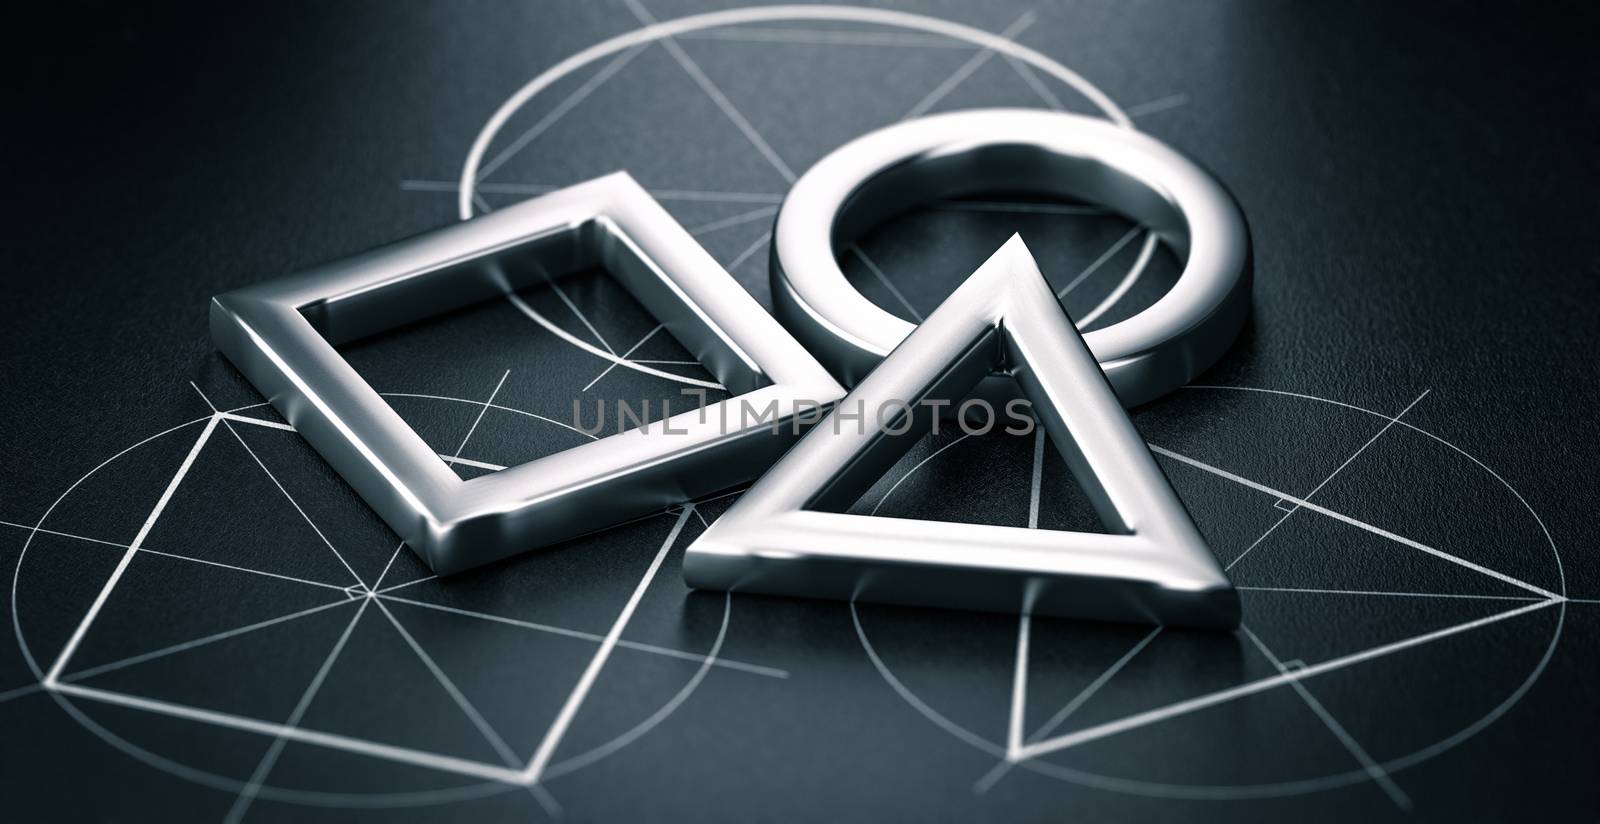 3D illustration of basic geometric shapes, triangle, circle and square over white drawings drawn on a black background. Concept of mathematics and geometry.